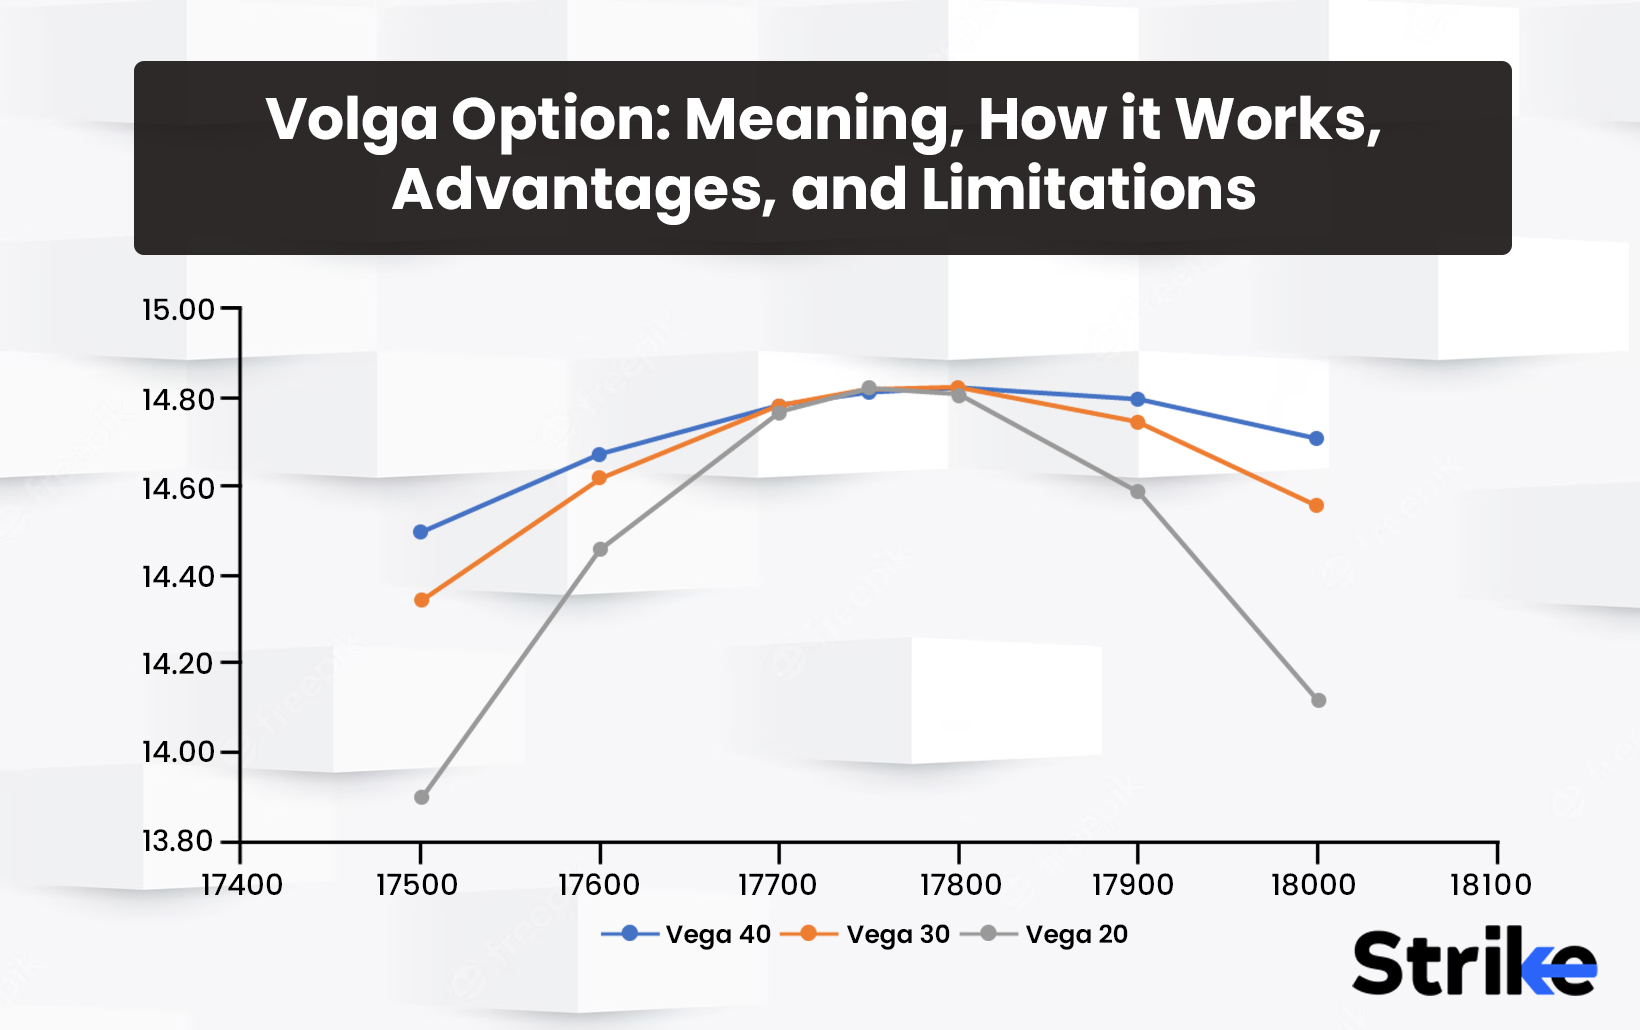 Volga Option: Meaning, How it Works, Advantages, and Limitations